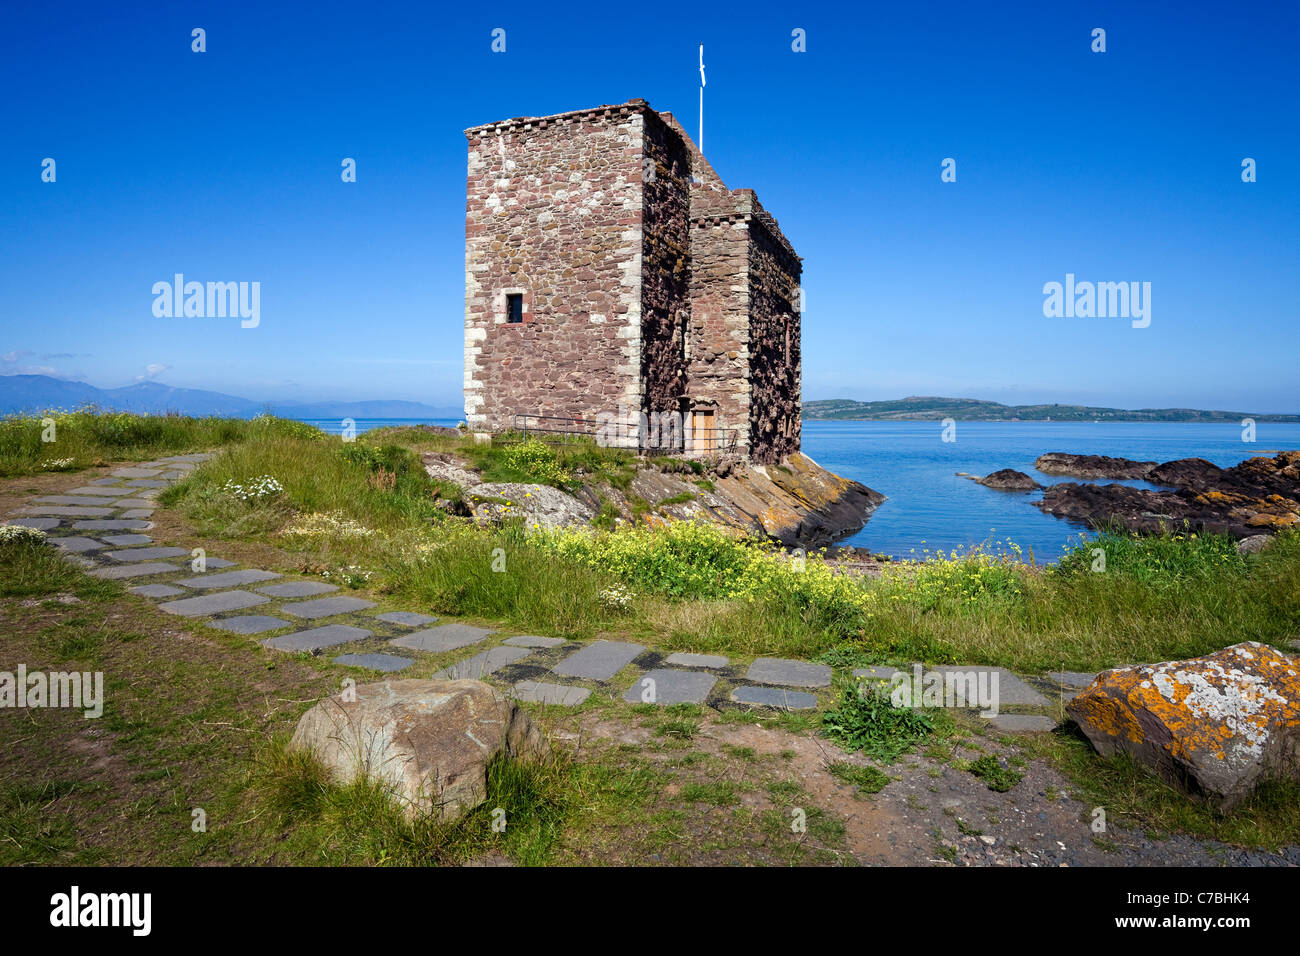 Portencross castle, with a view across the Firth of Clyde to the Island of Arran and Little Cumbrae, Ayrshire, Scotland Stock Photo